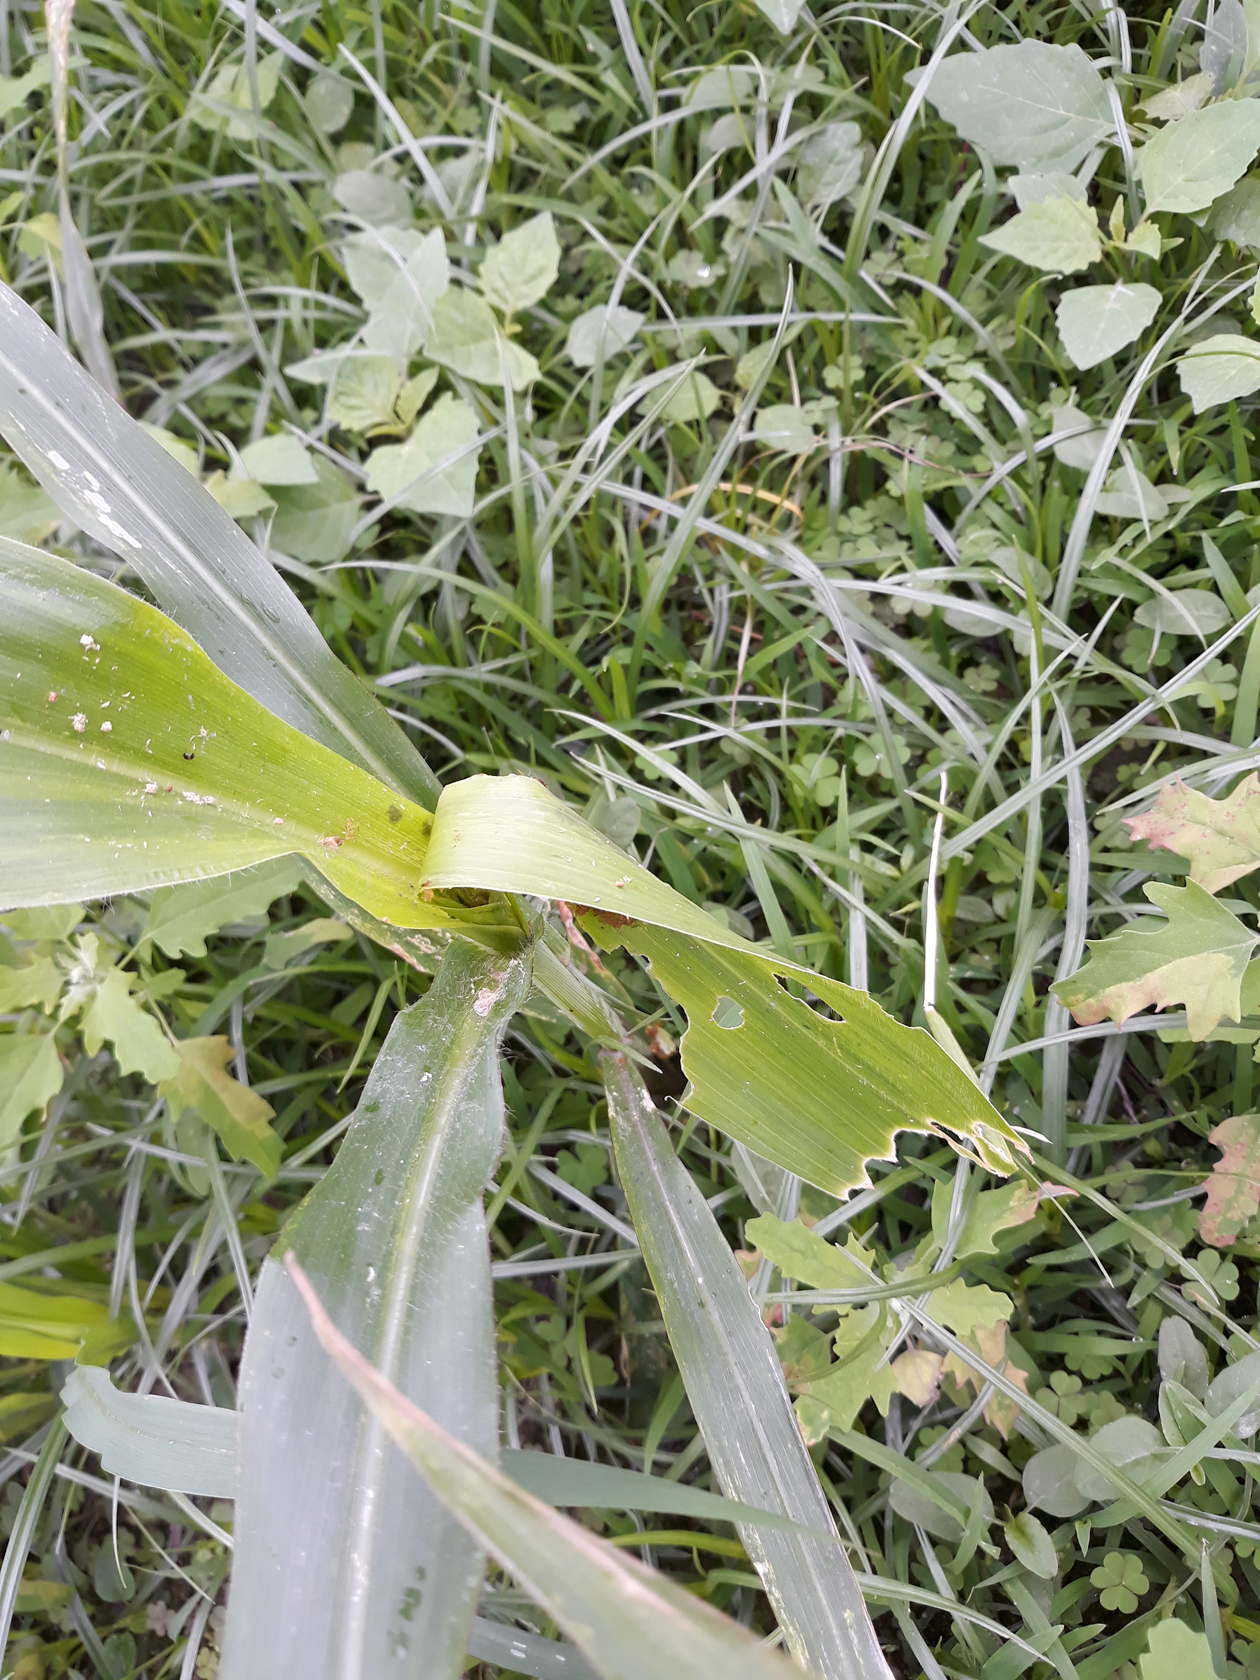 Large holes and excessive droppings on early whorl-stage corn leaves indicate the presence of fall armyworms.